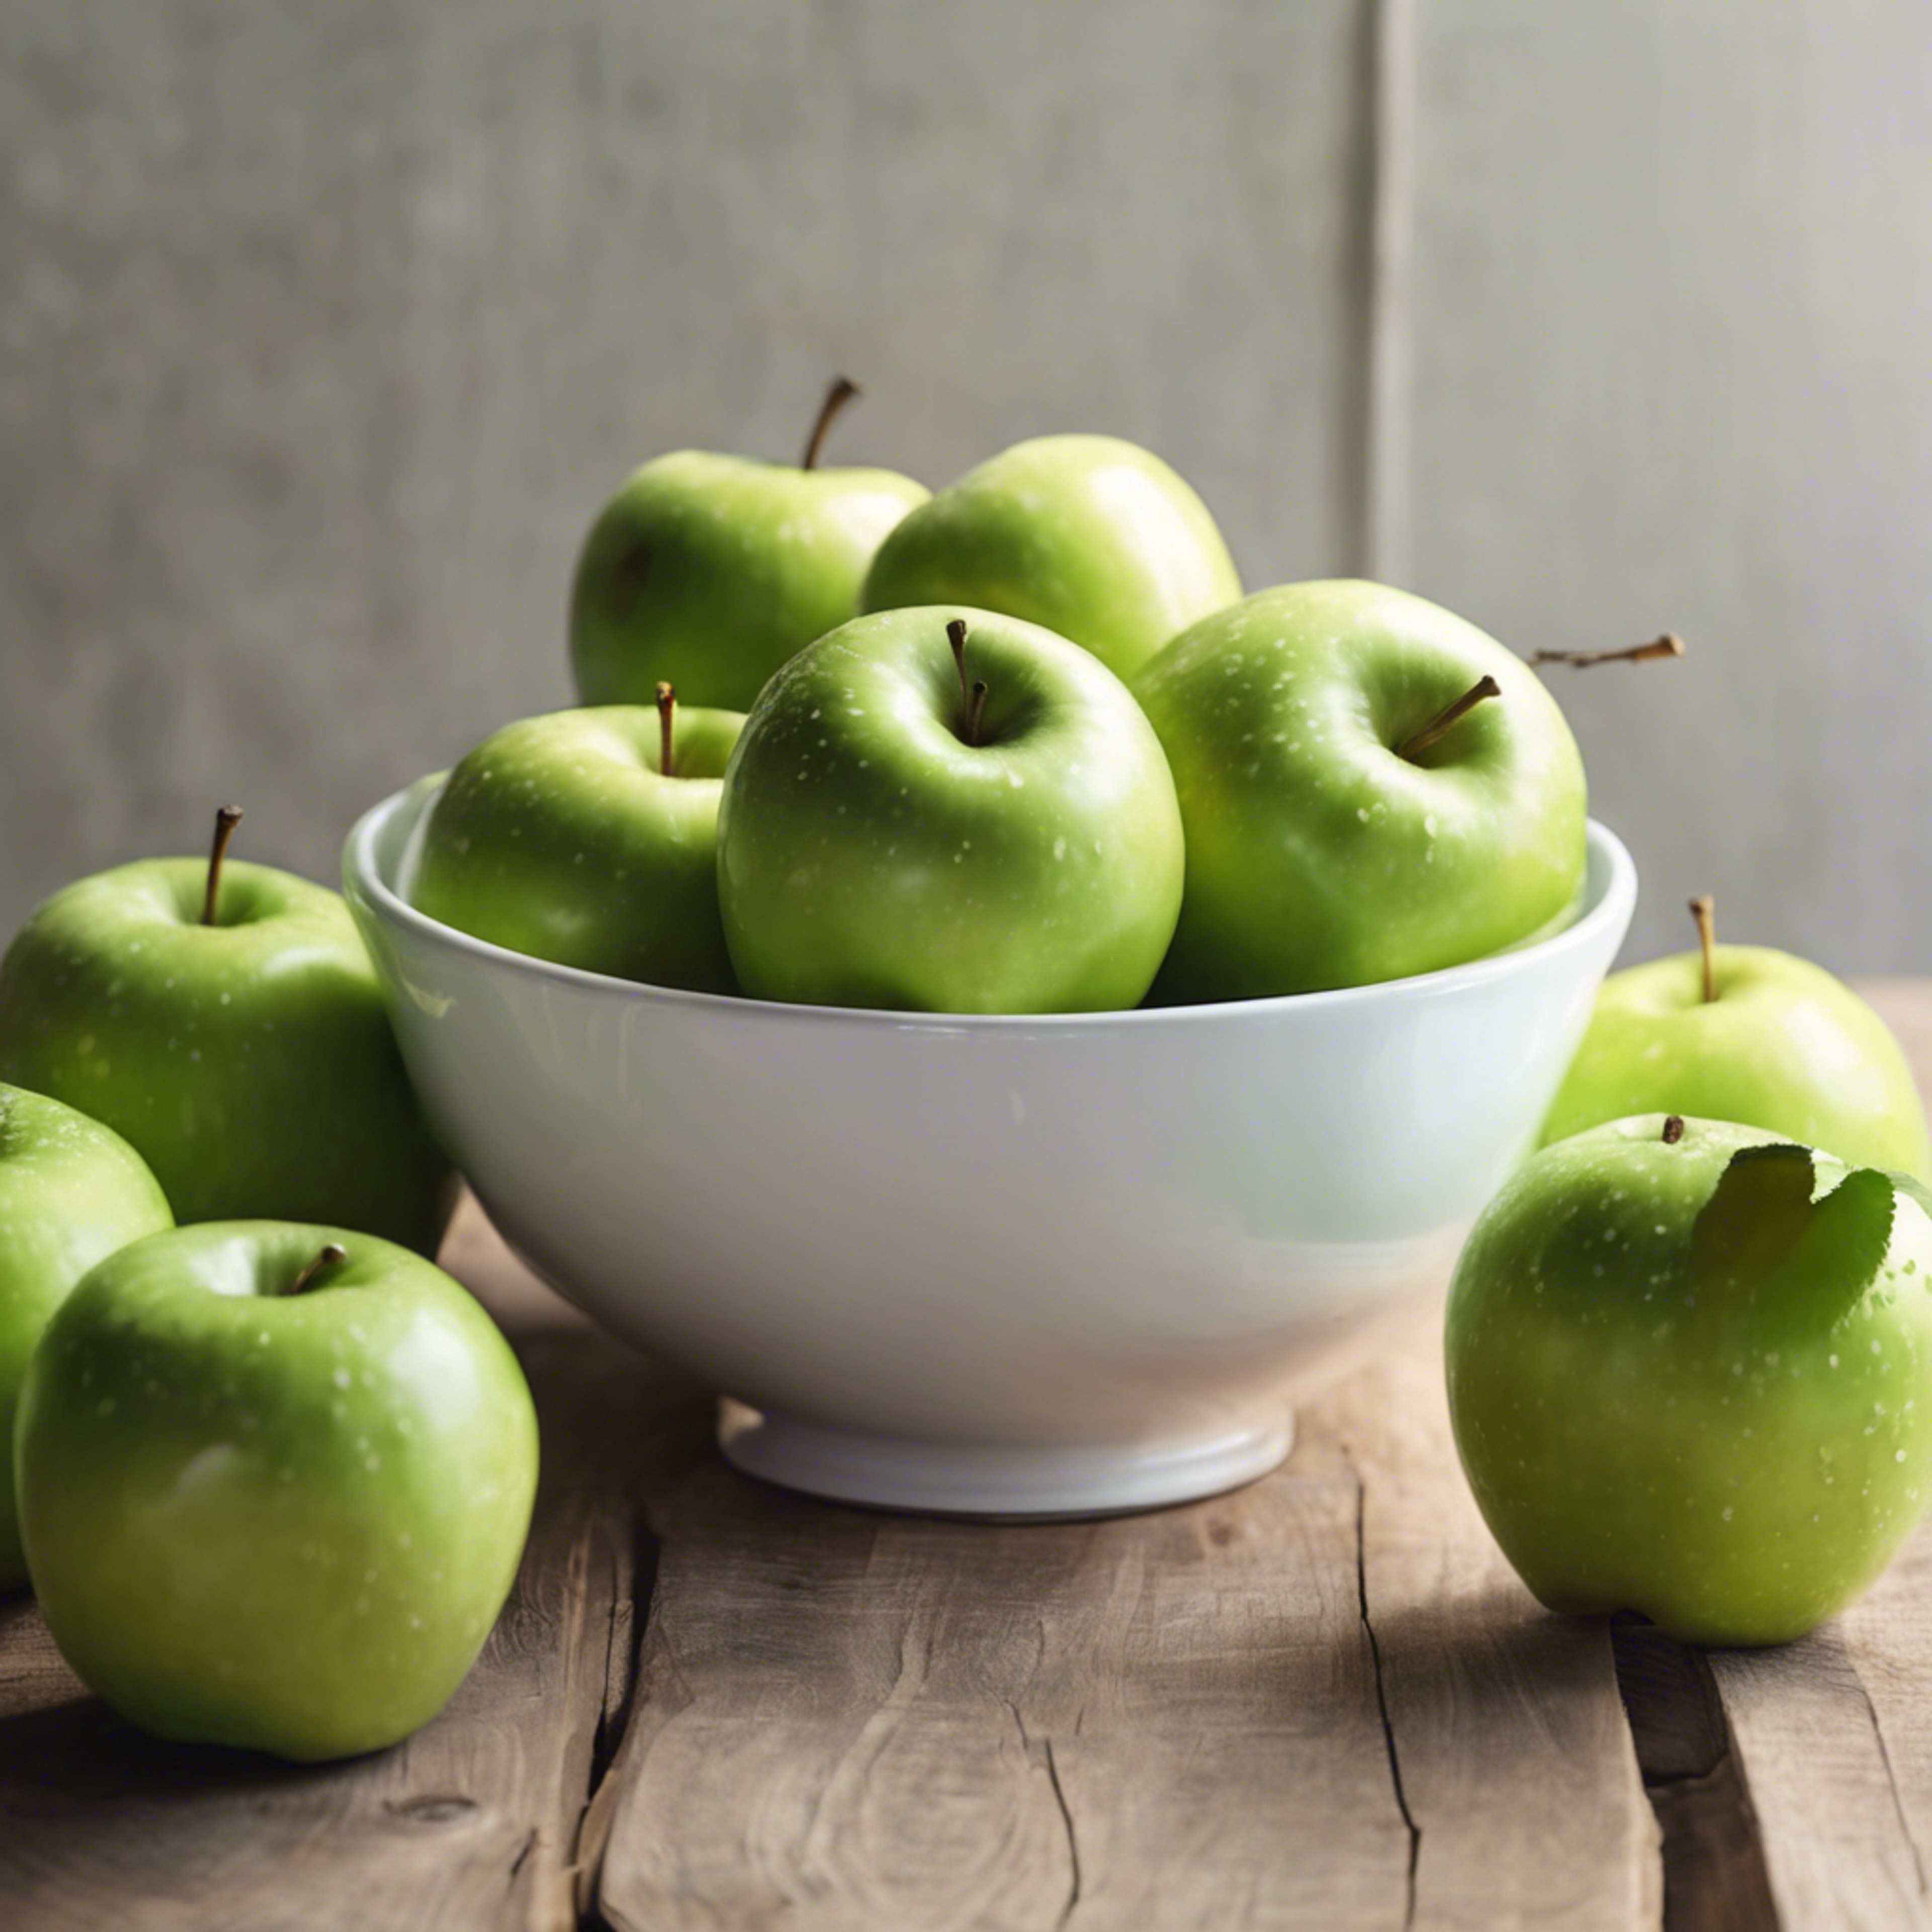 Green apples in a white ceramic bowl on a wooden table. Wallpaper[feabce122cbe4d2eb232]